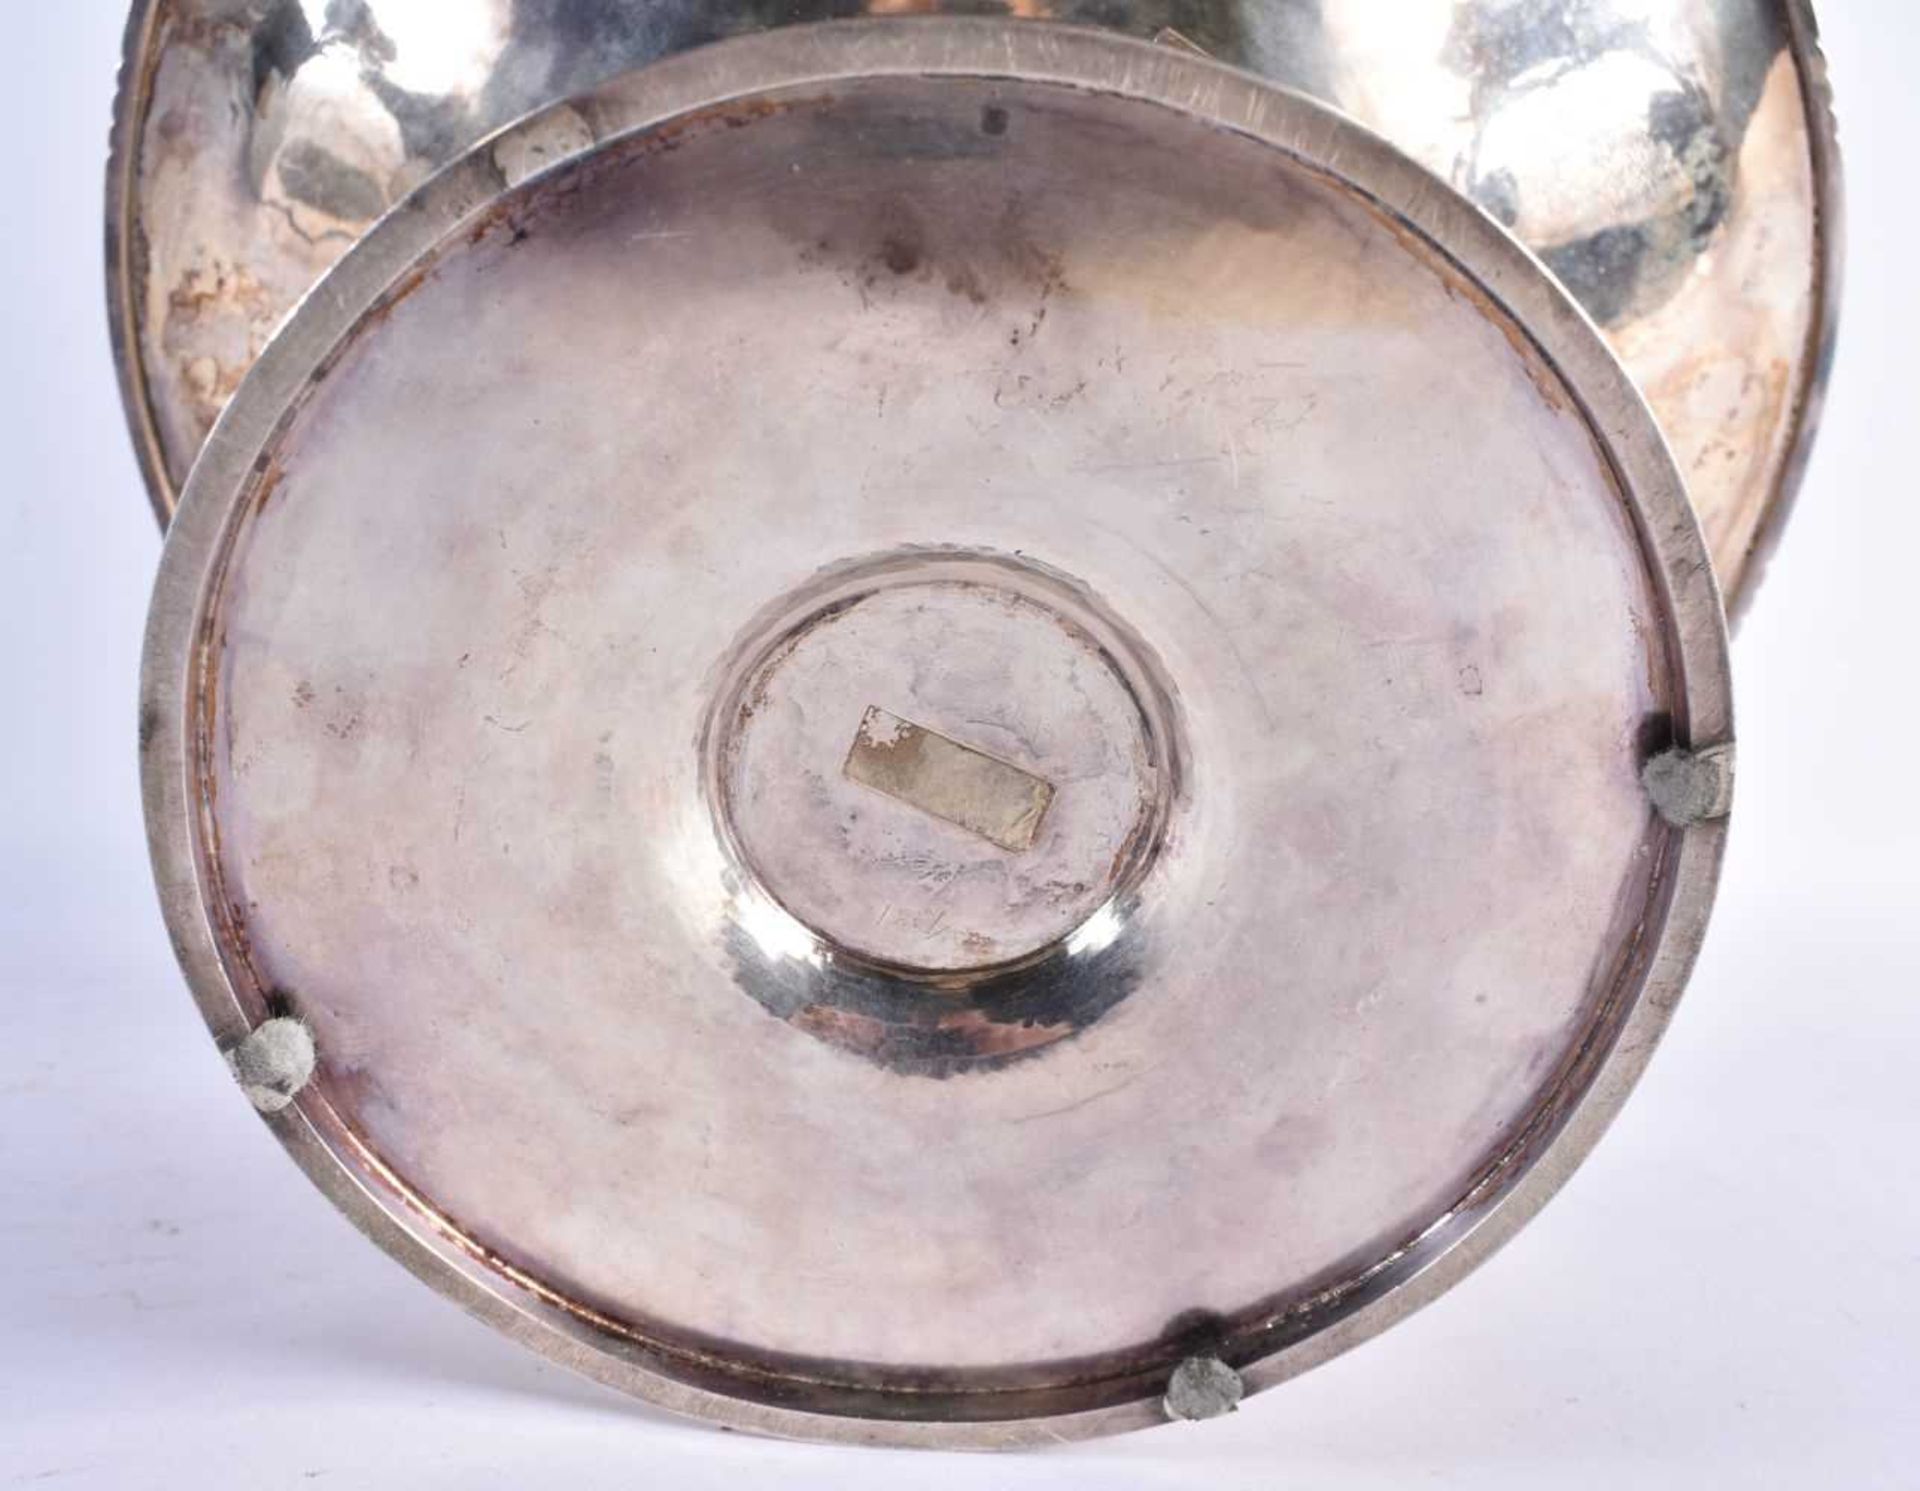 A LOVELY LARGE ENGLISH SILVER ART NOUVEAU STYLE PEDESTAL BOWL by Robert Edgar Stone, formed with a - Image 6 of 6